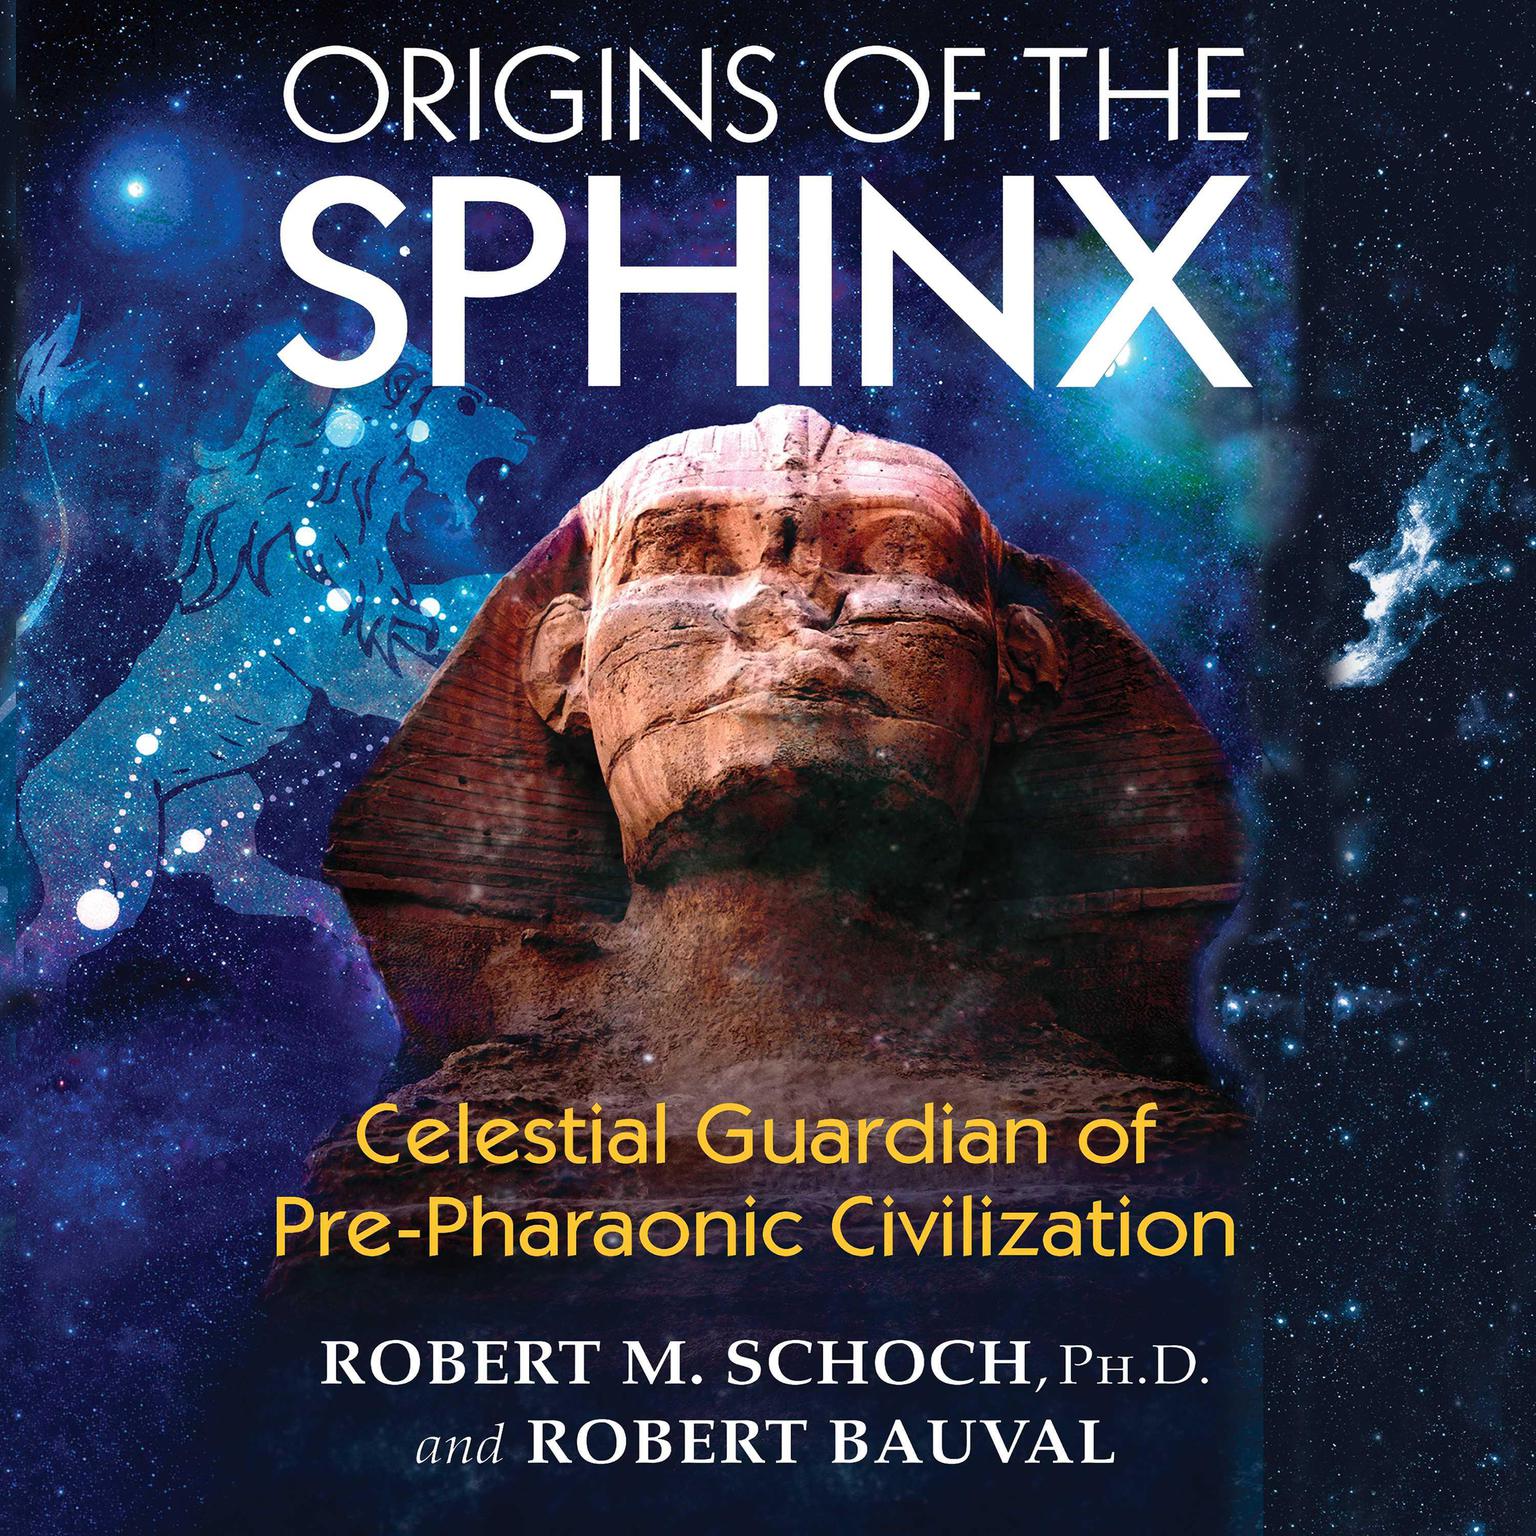 Origins of the Sphinx: Celestial Guardian of Pre-Pharaonic Civilization Audiobook, by Robert M. Schoch